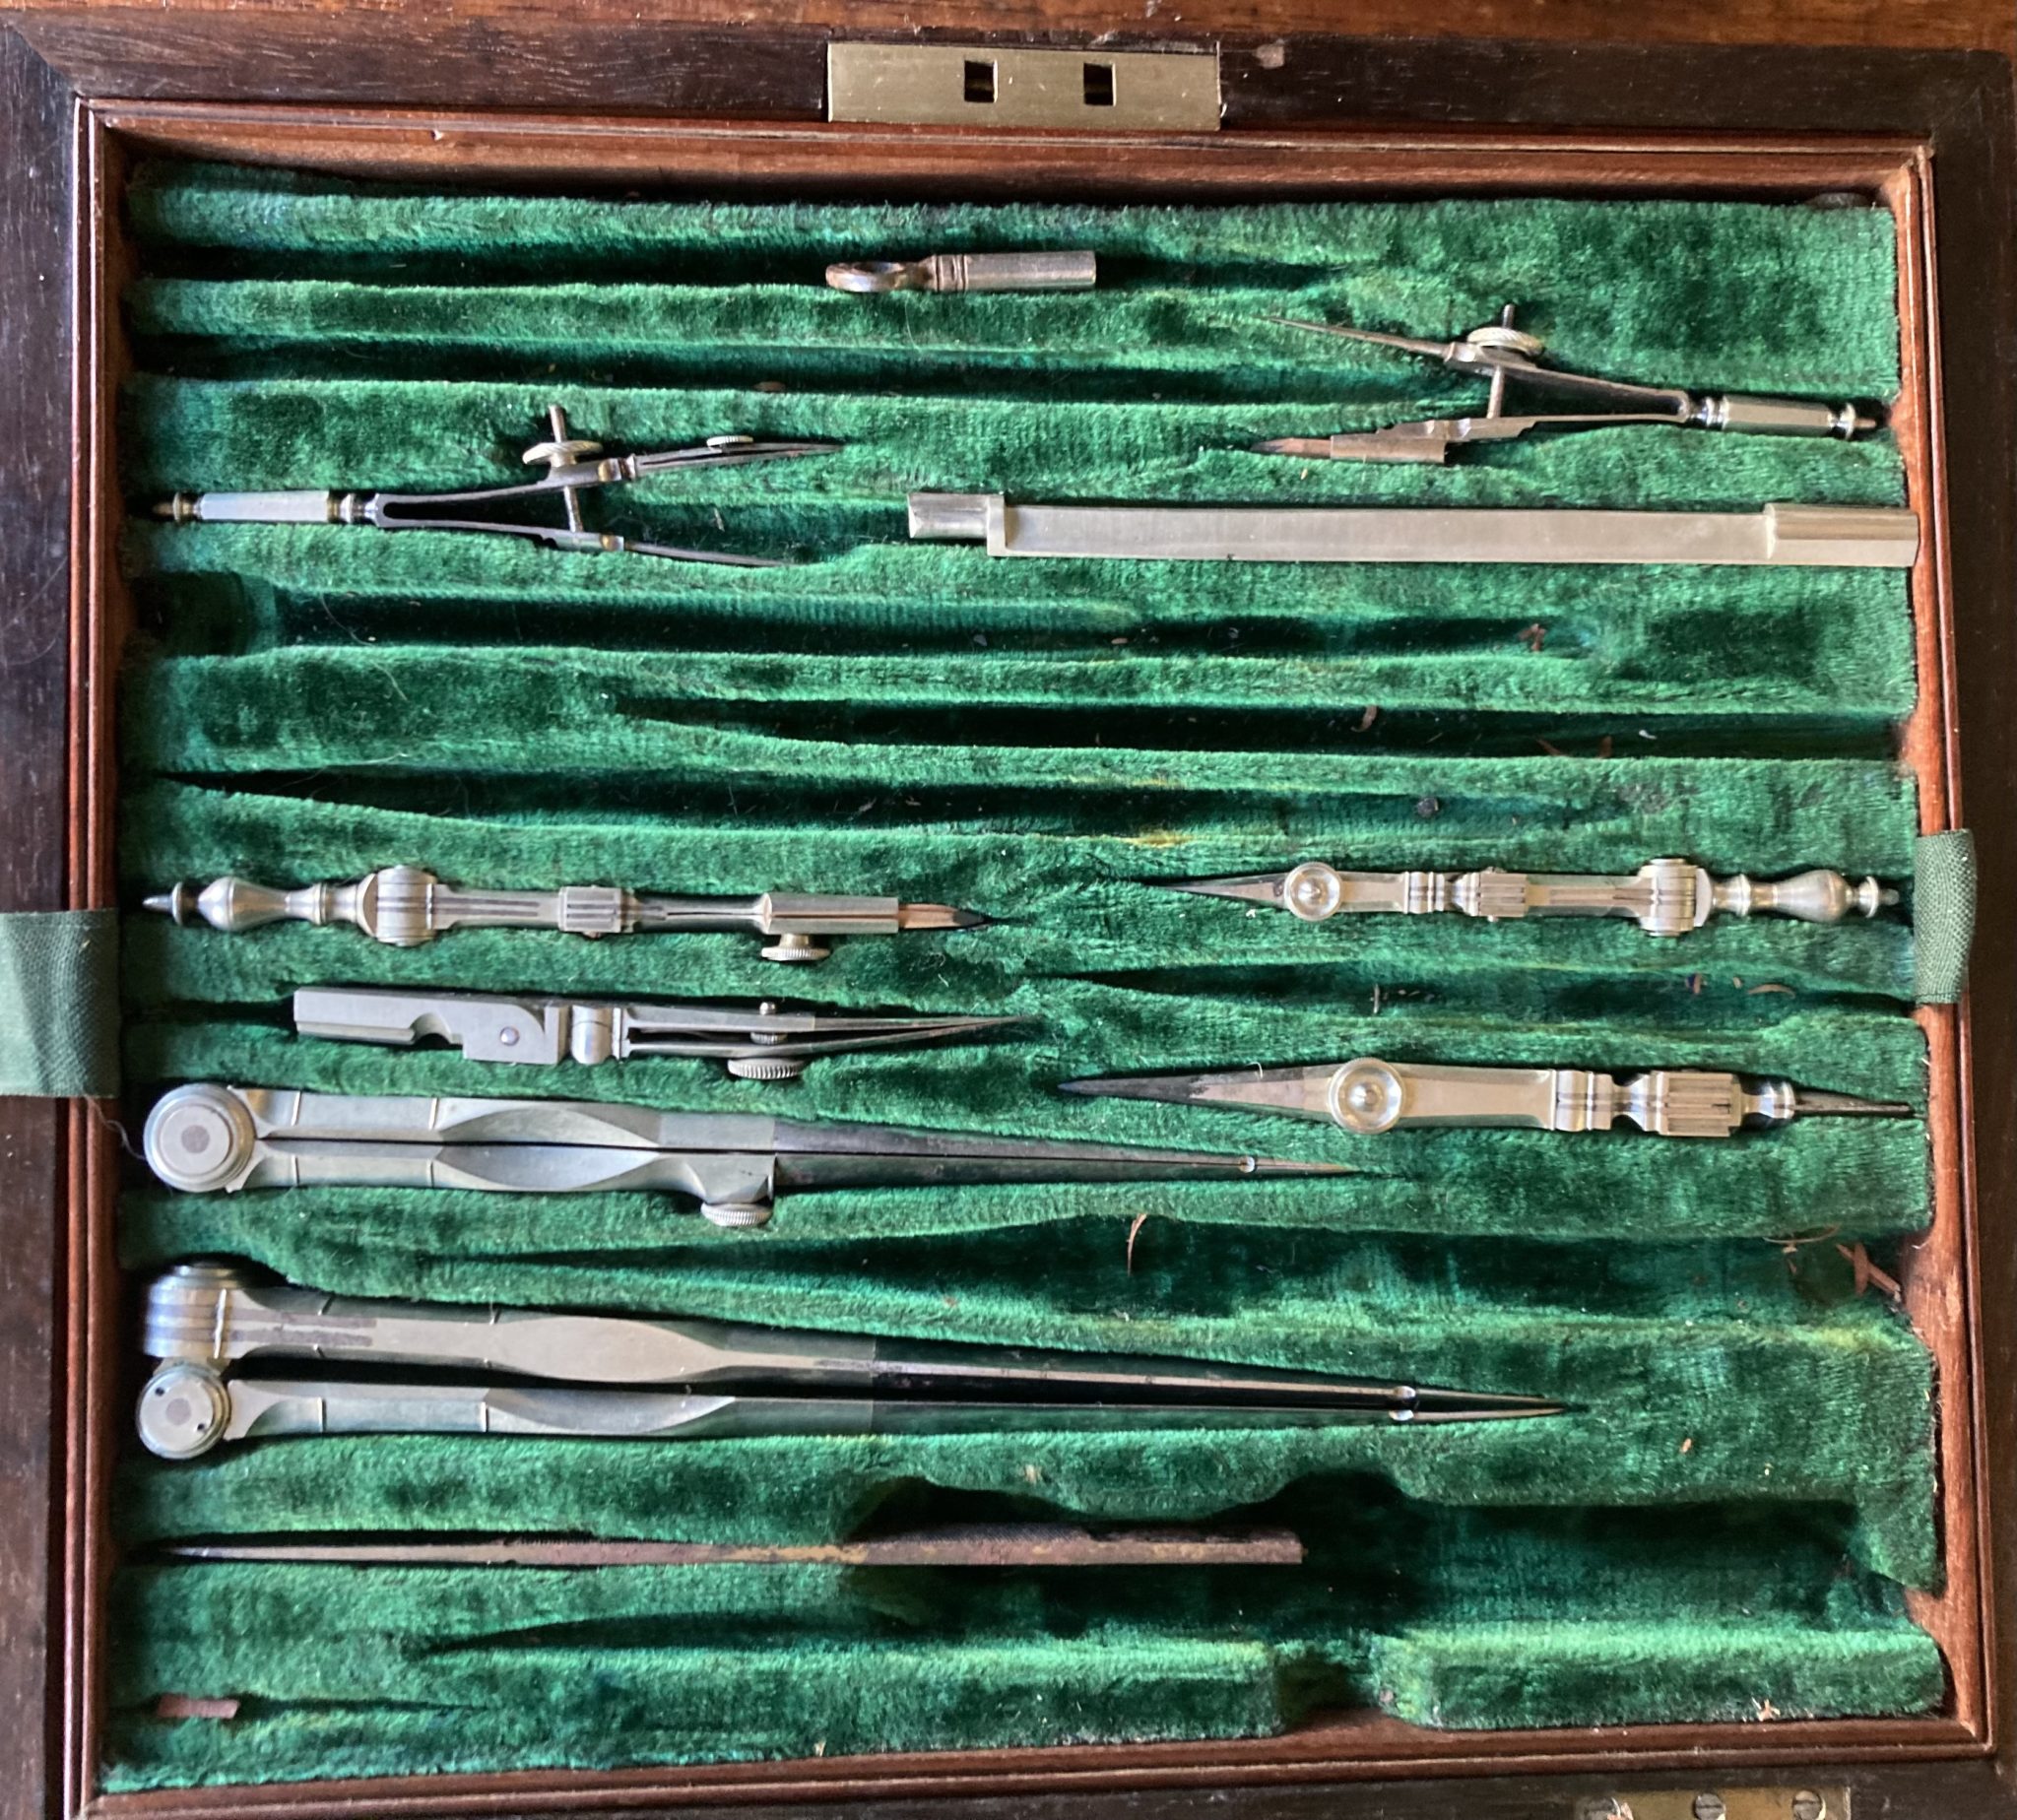 Good Part Set of Drawing Instruments with Three legged Dividers